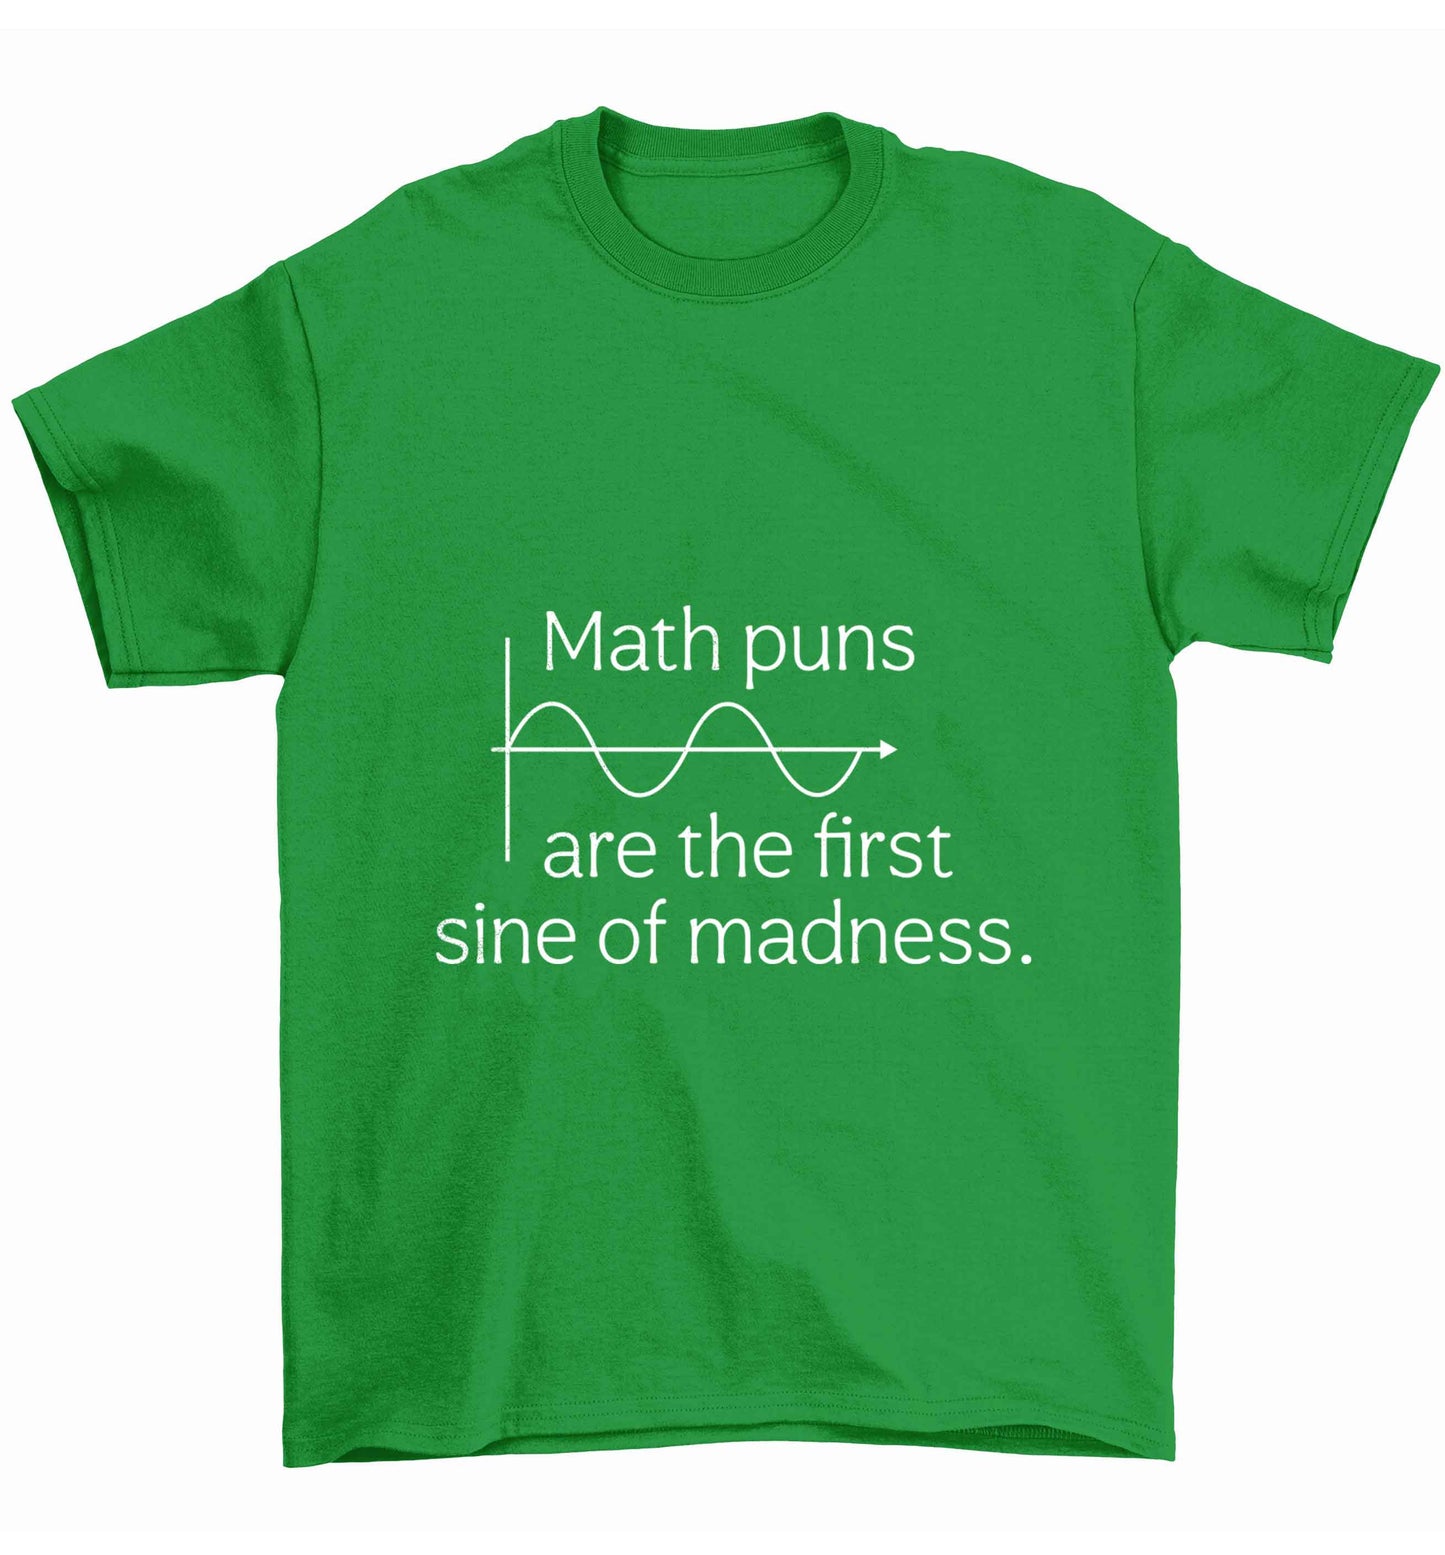 Math puns are the first sine of madness Children's green Tshirt 12-13 Years